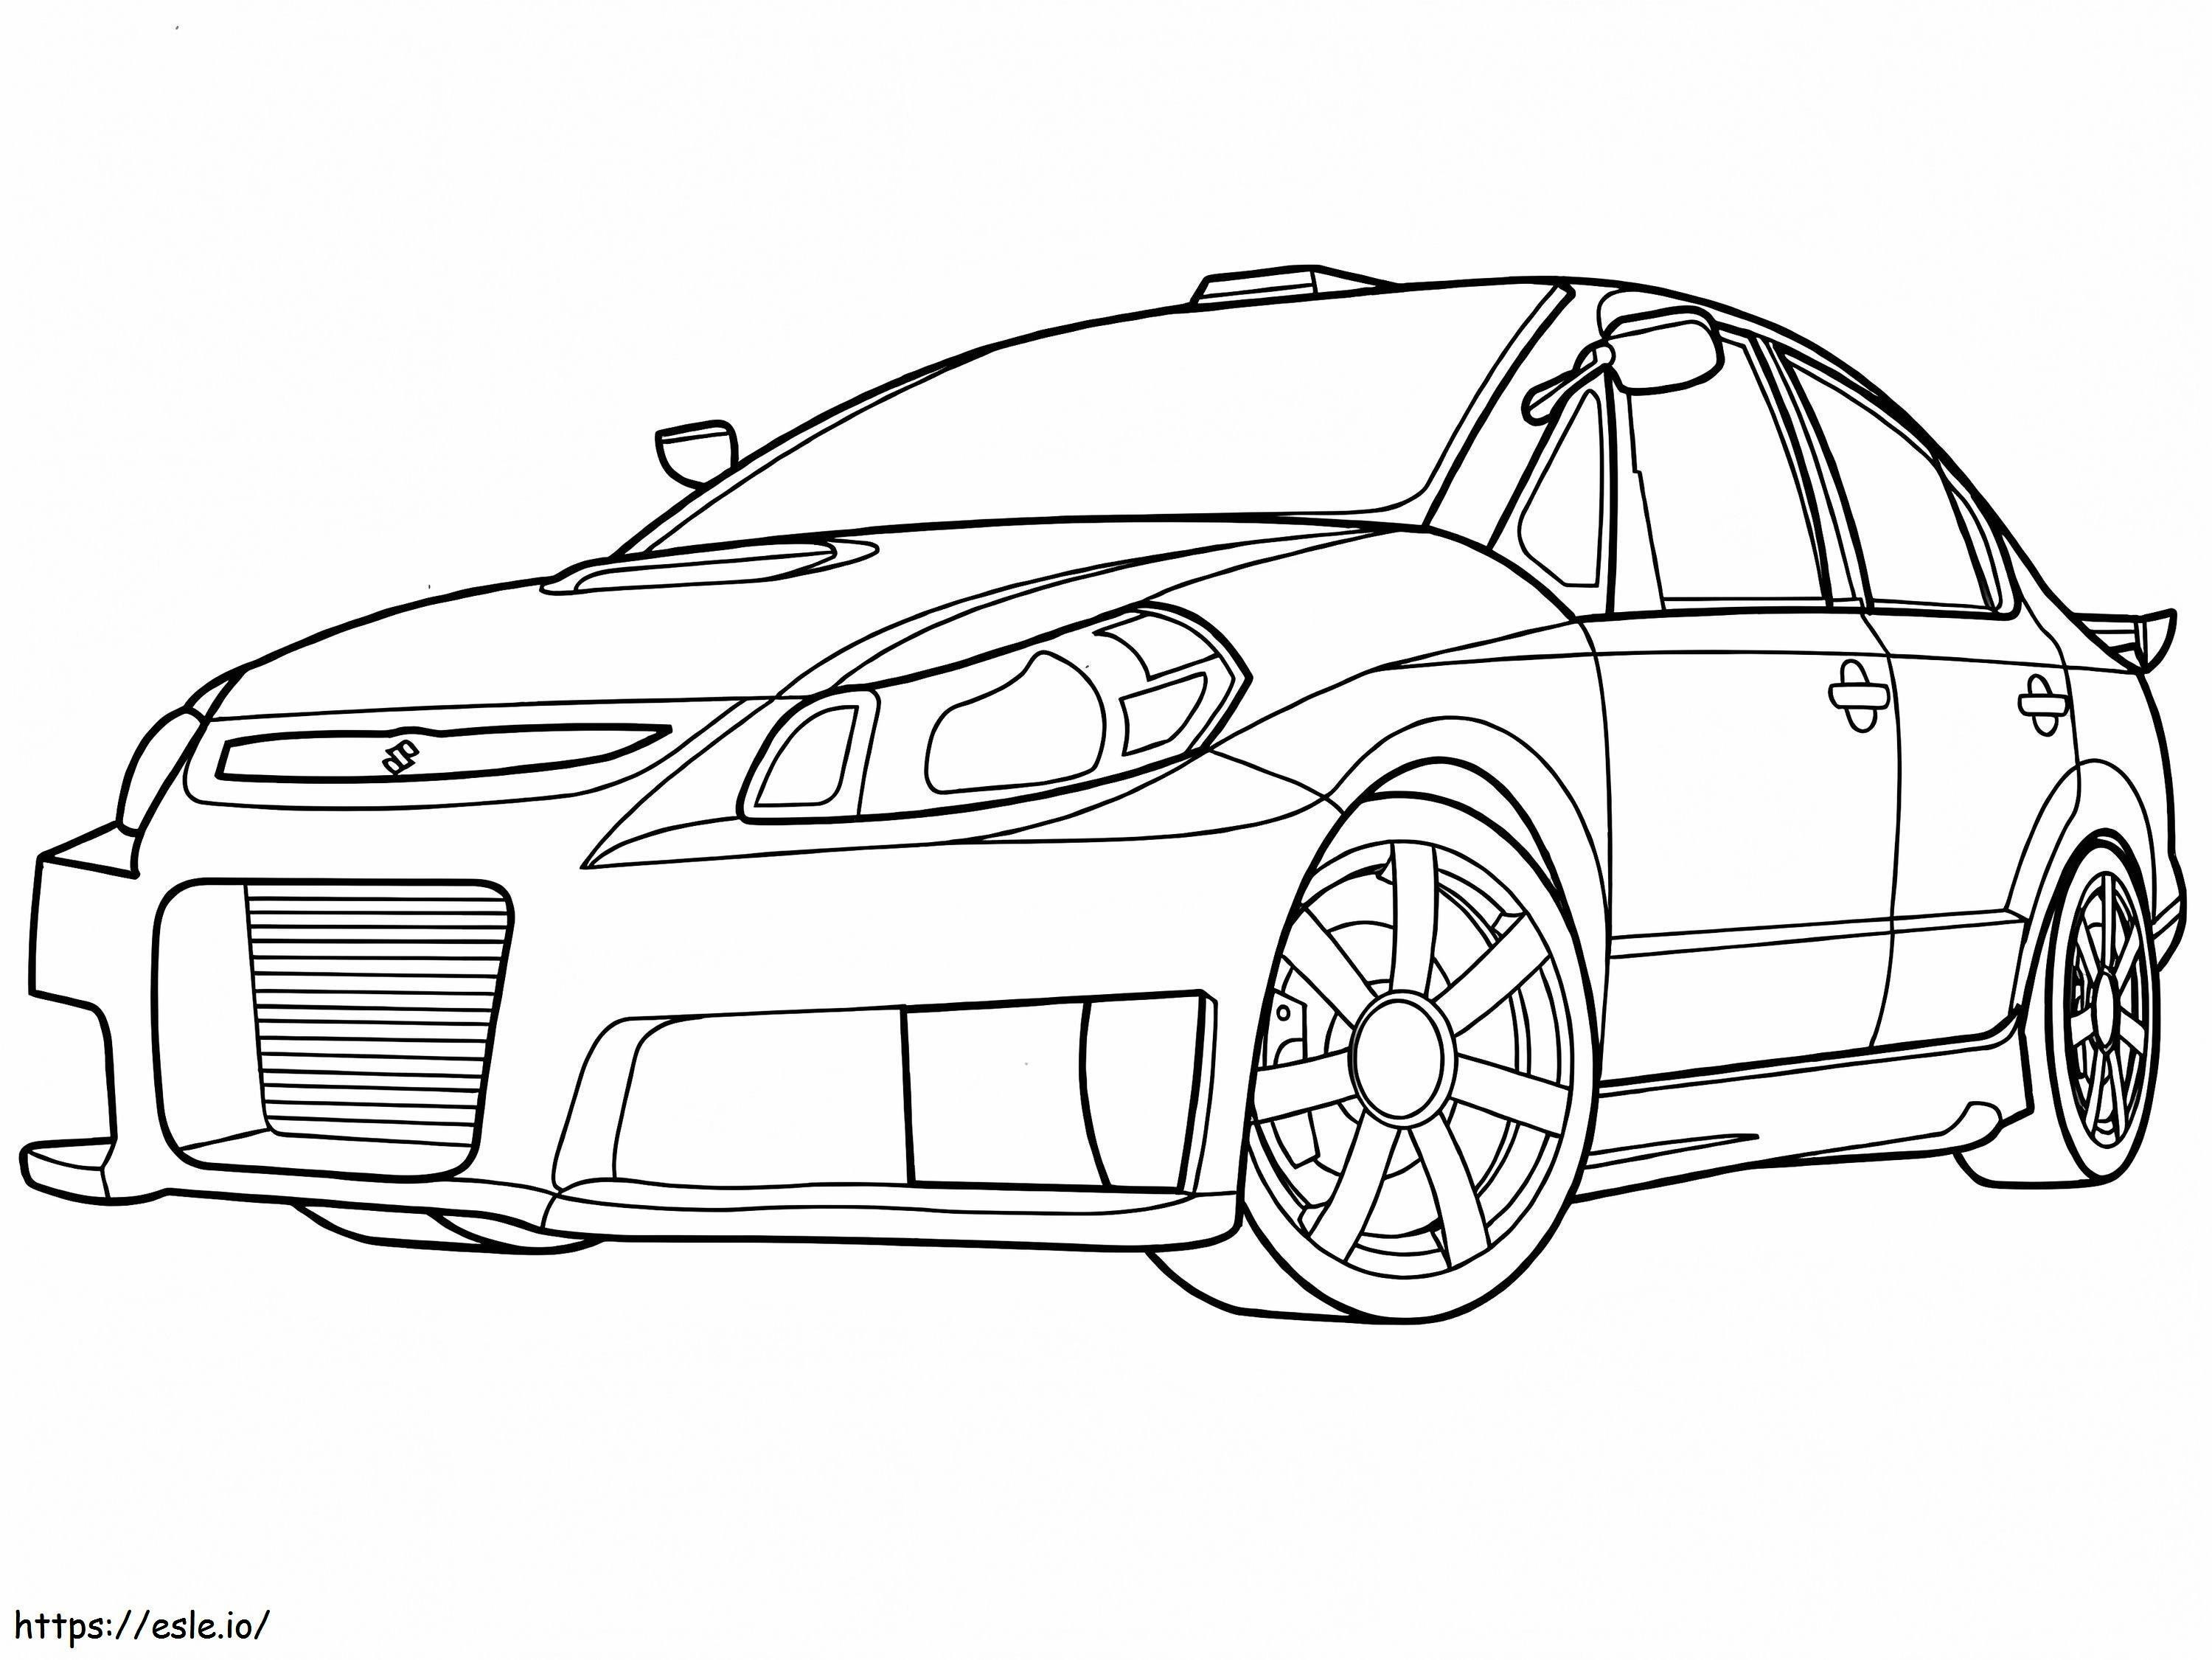 Racing Car 4 coloring page